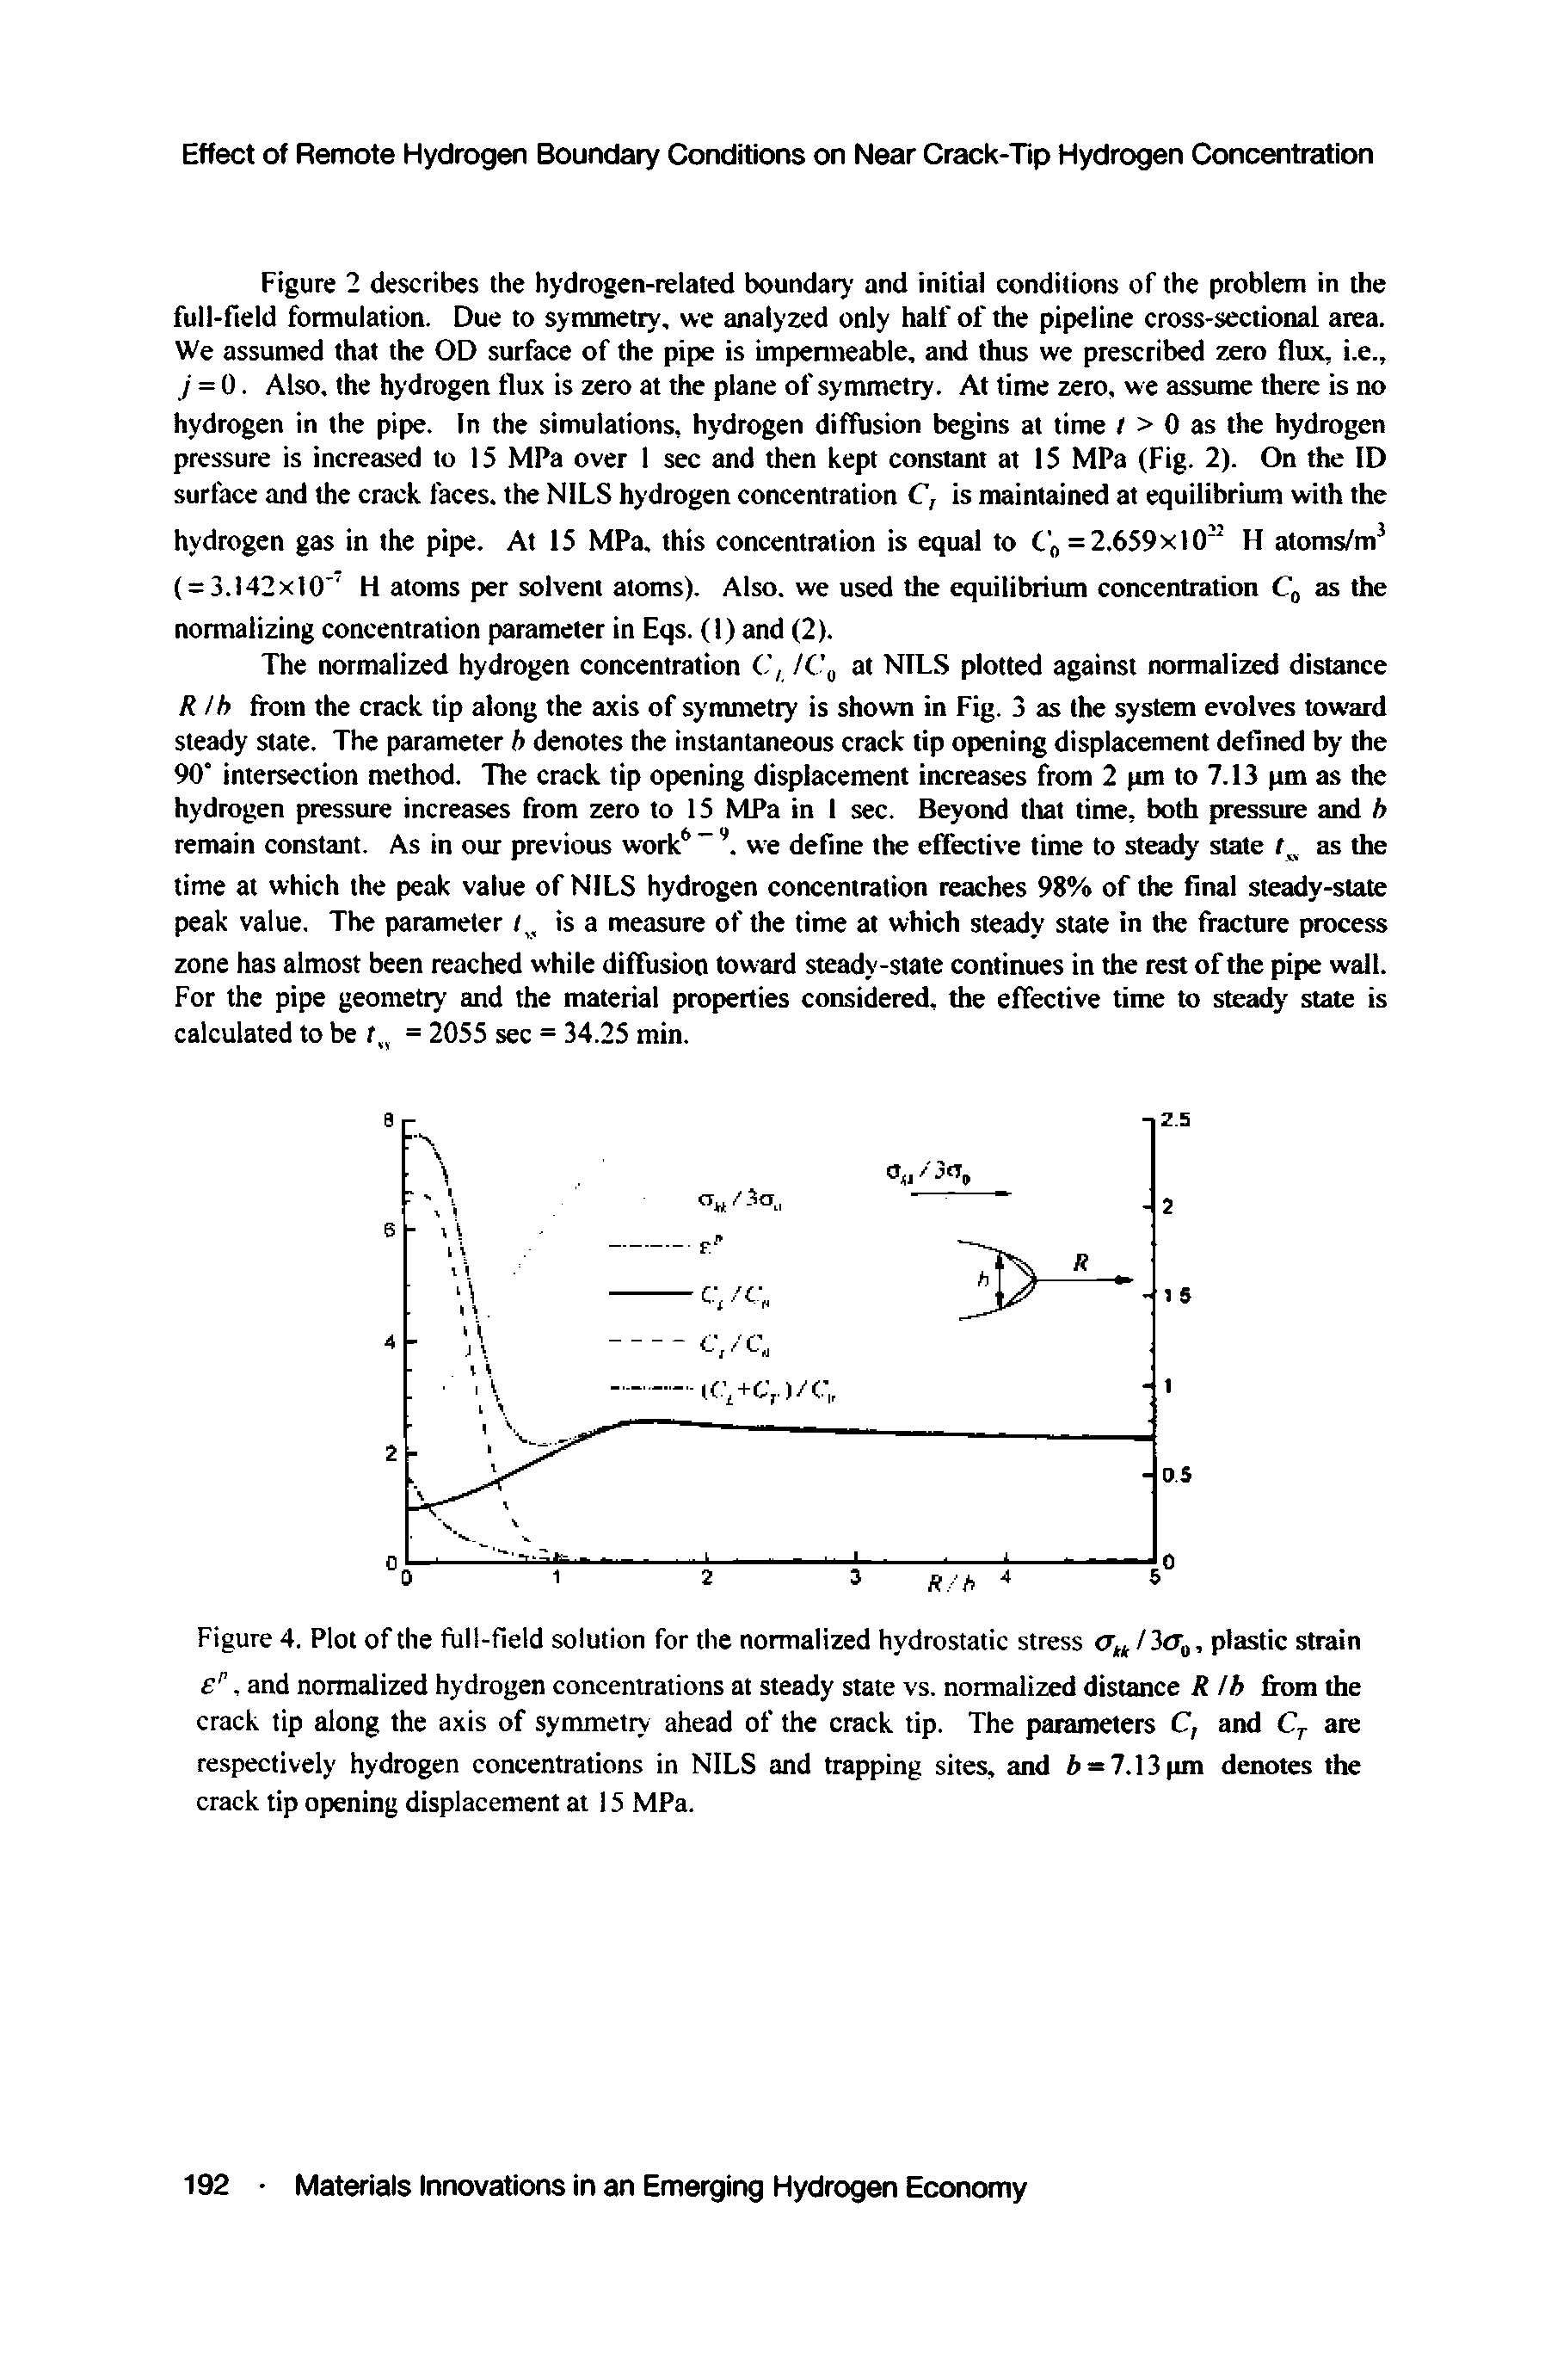 Figure 4. Plot of the full-field solution for the normalized hydrostatic stress <Jlk / 3<r0, plastic strain eF, and normalized hydrogen concentrations at steady state vs. normalized distance R lb from the crack tip along the axis of symmetry ahead of the crack tip. The parameters C, and CT are respectively hydrogen concentrations in NILS and trapping sites, and b = 7.13 pm denotes the crack tip opening displacement at 15 MPa.